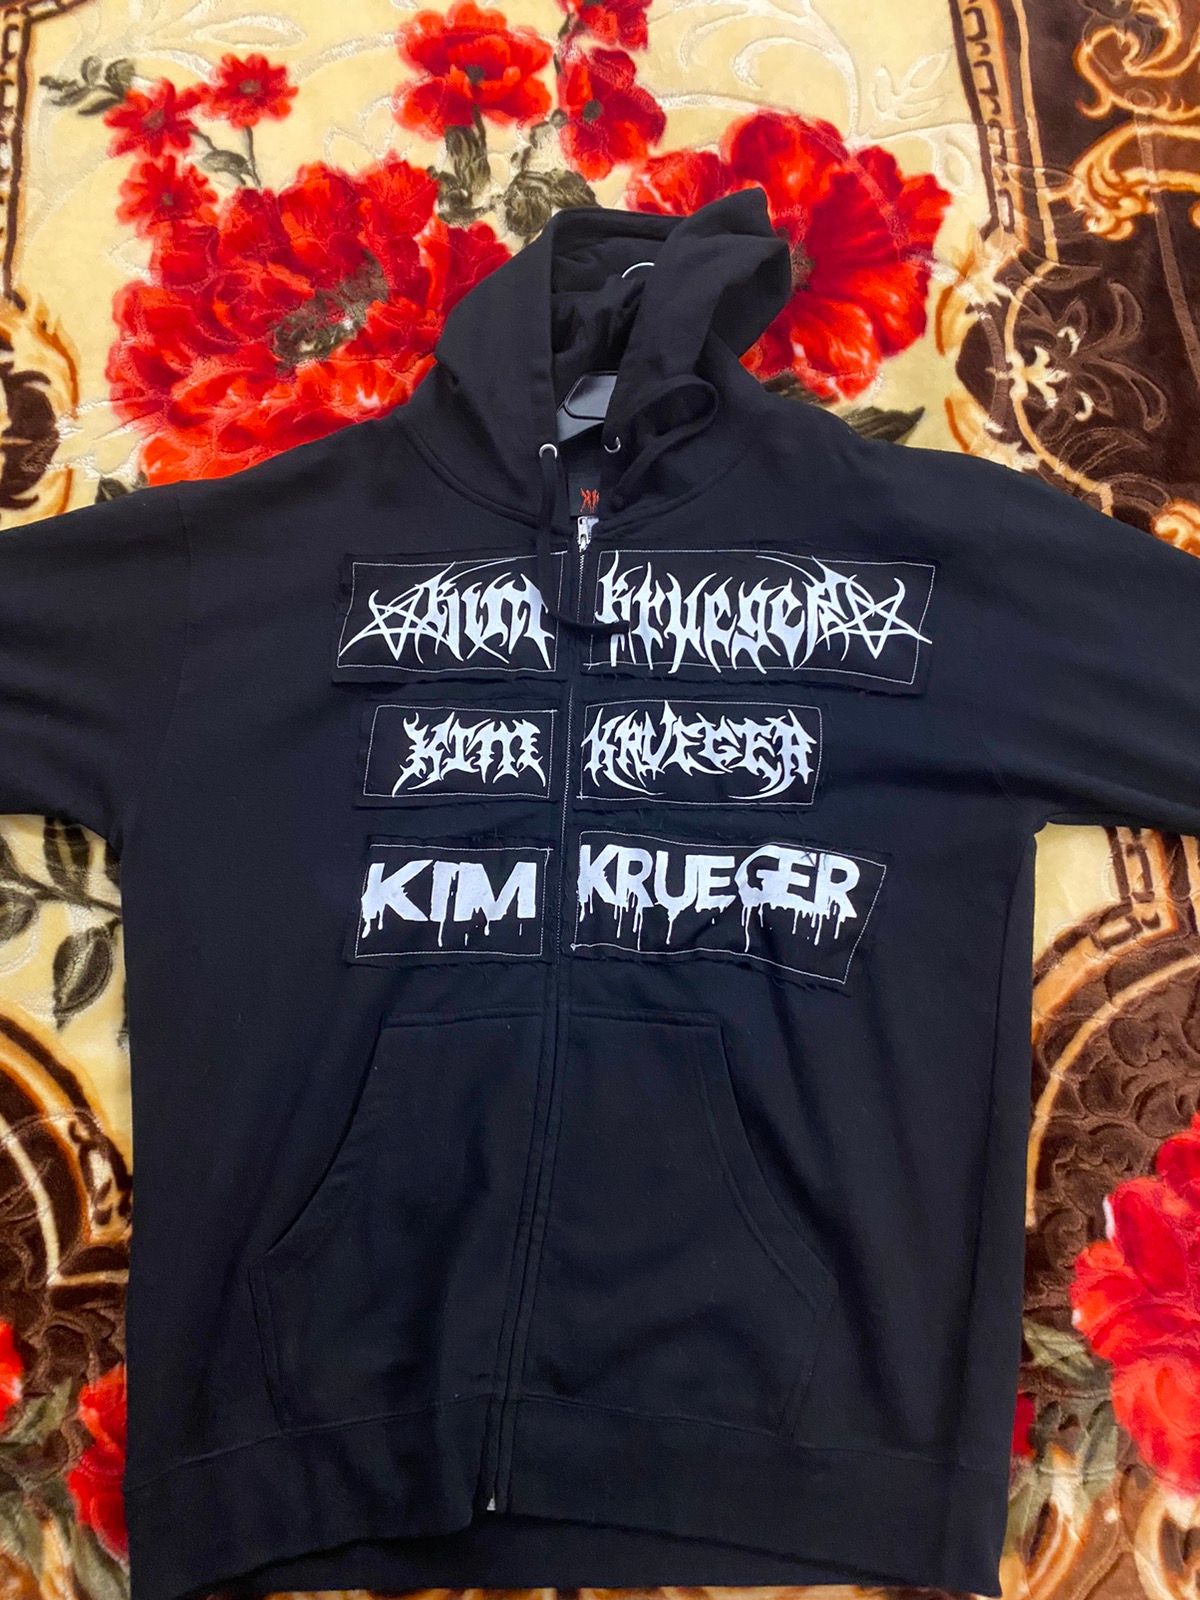 Rick Owens KIM KREUGER HOODIE FROM BURBERRY ERRY | Grailed